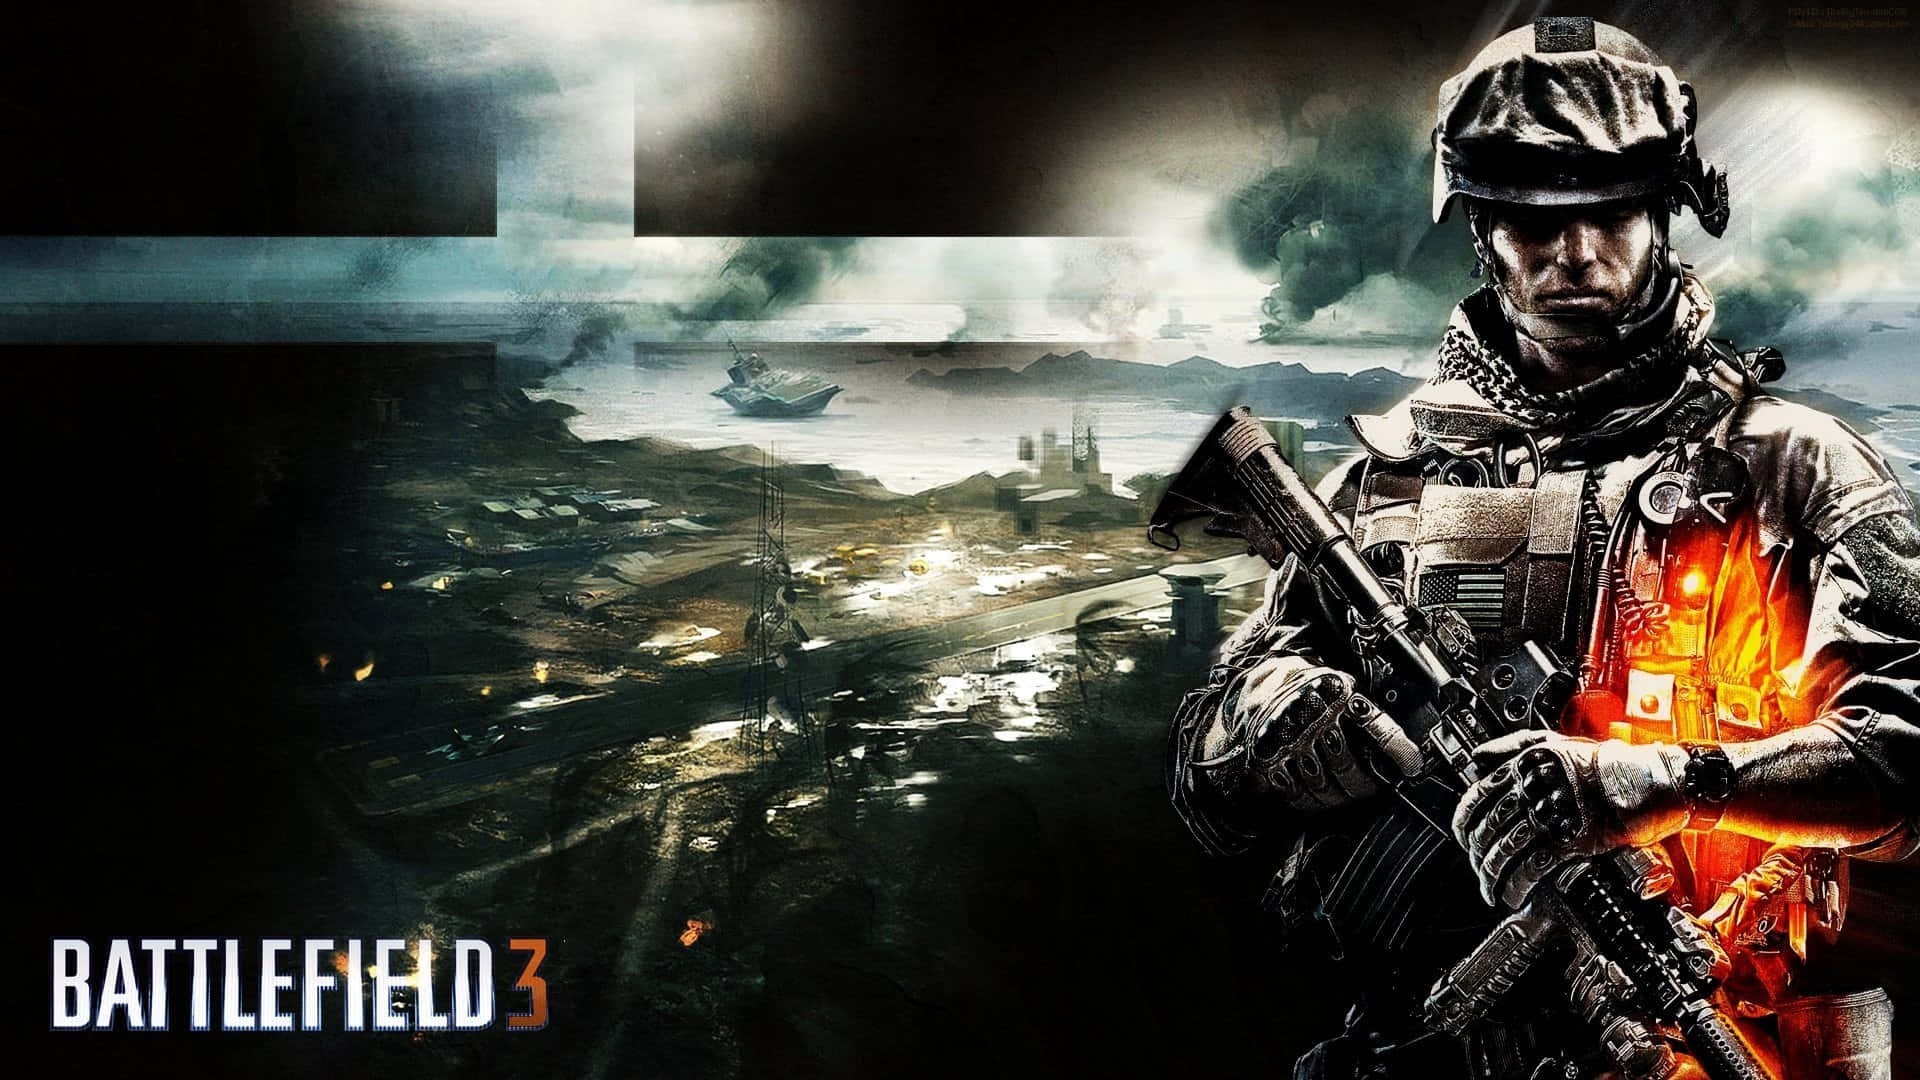 Get ready to fight in the world of Battlefield 3!